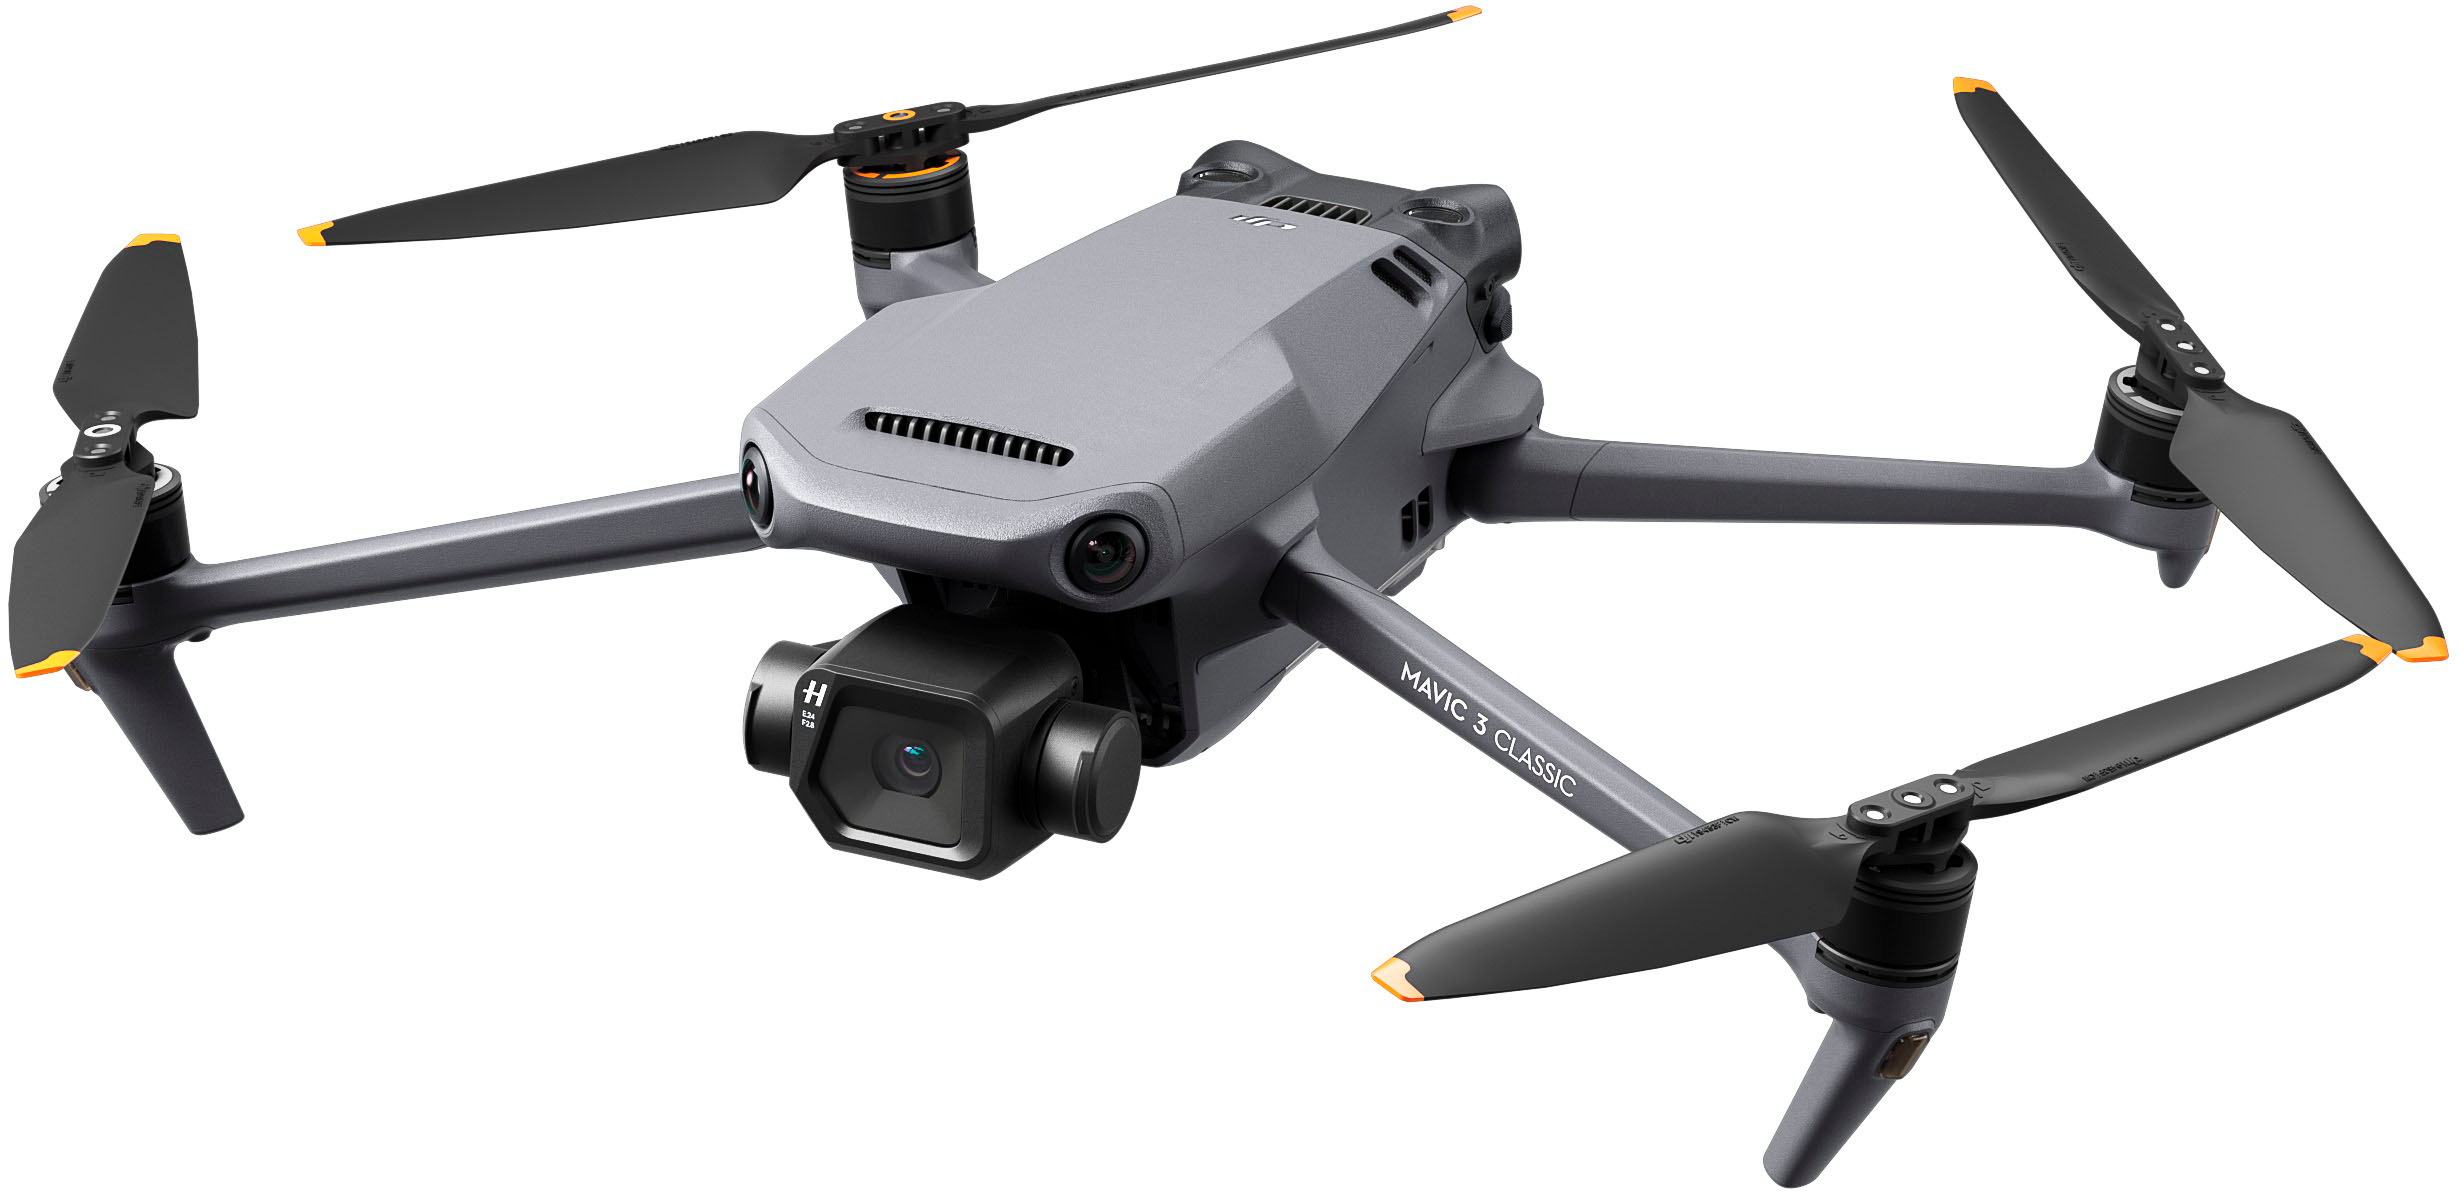 The DJI Mavic 3 is the company's best consumer drone yet